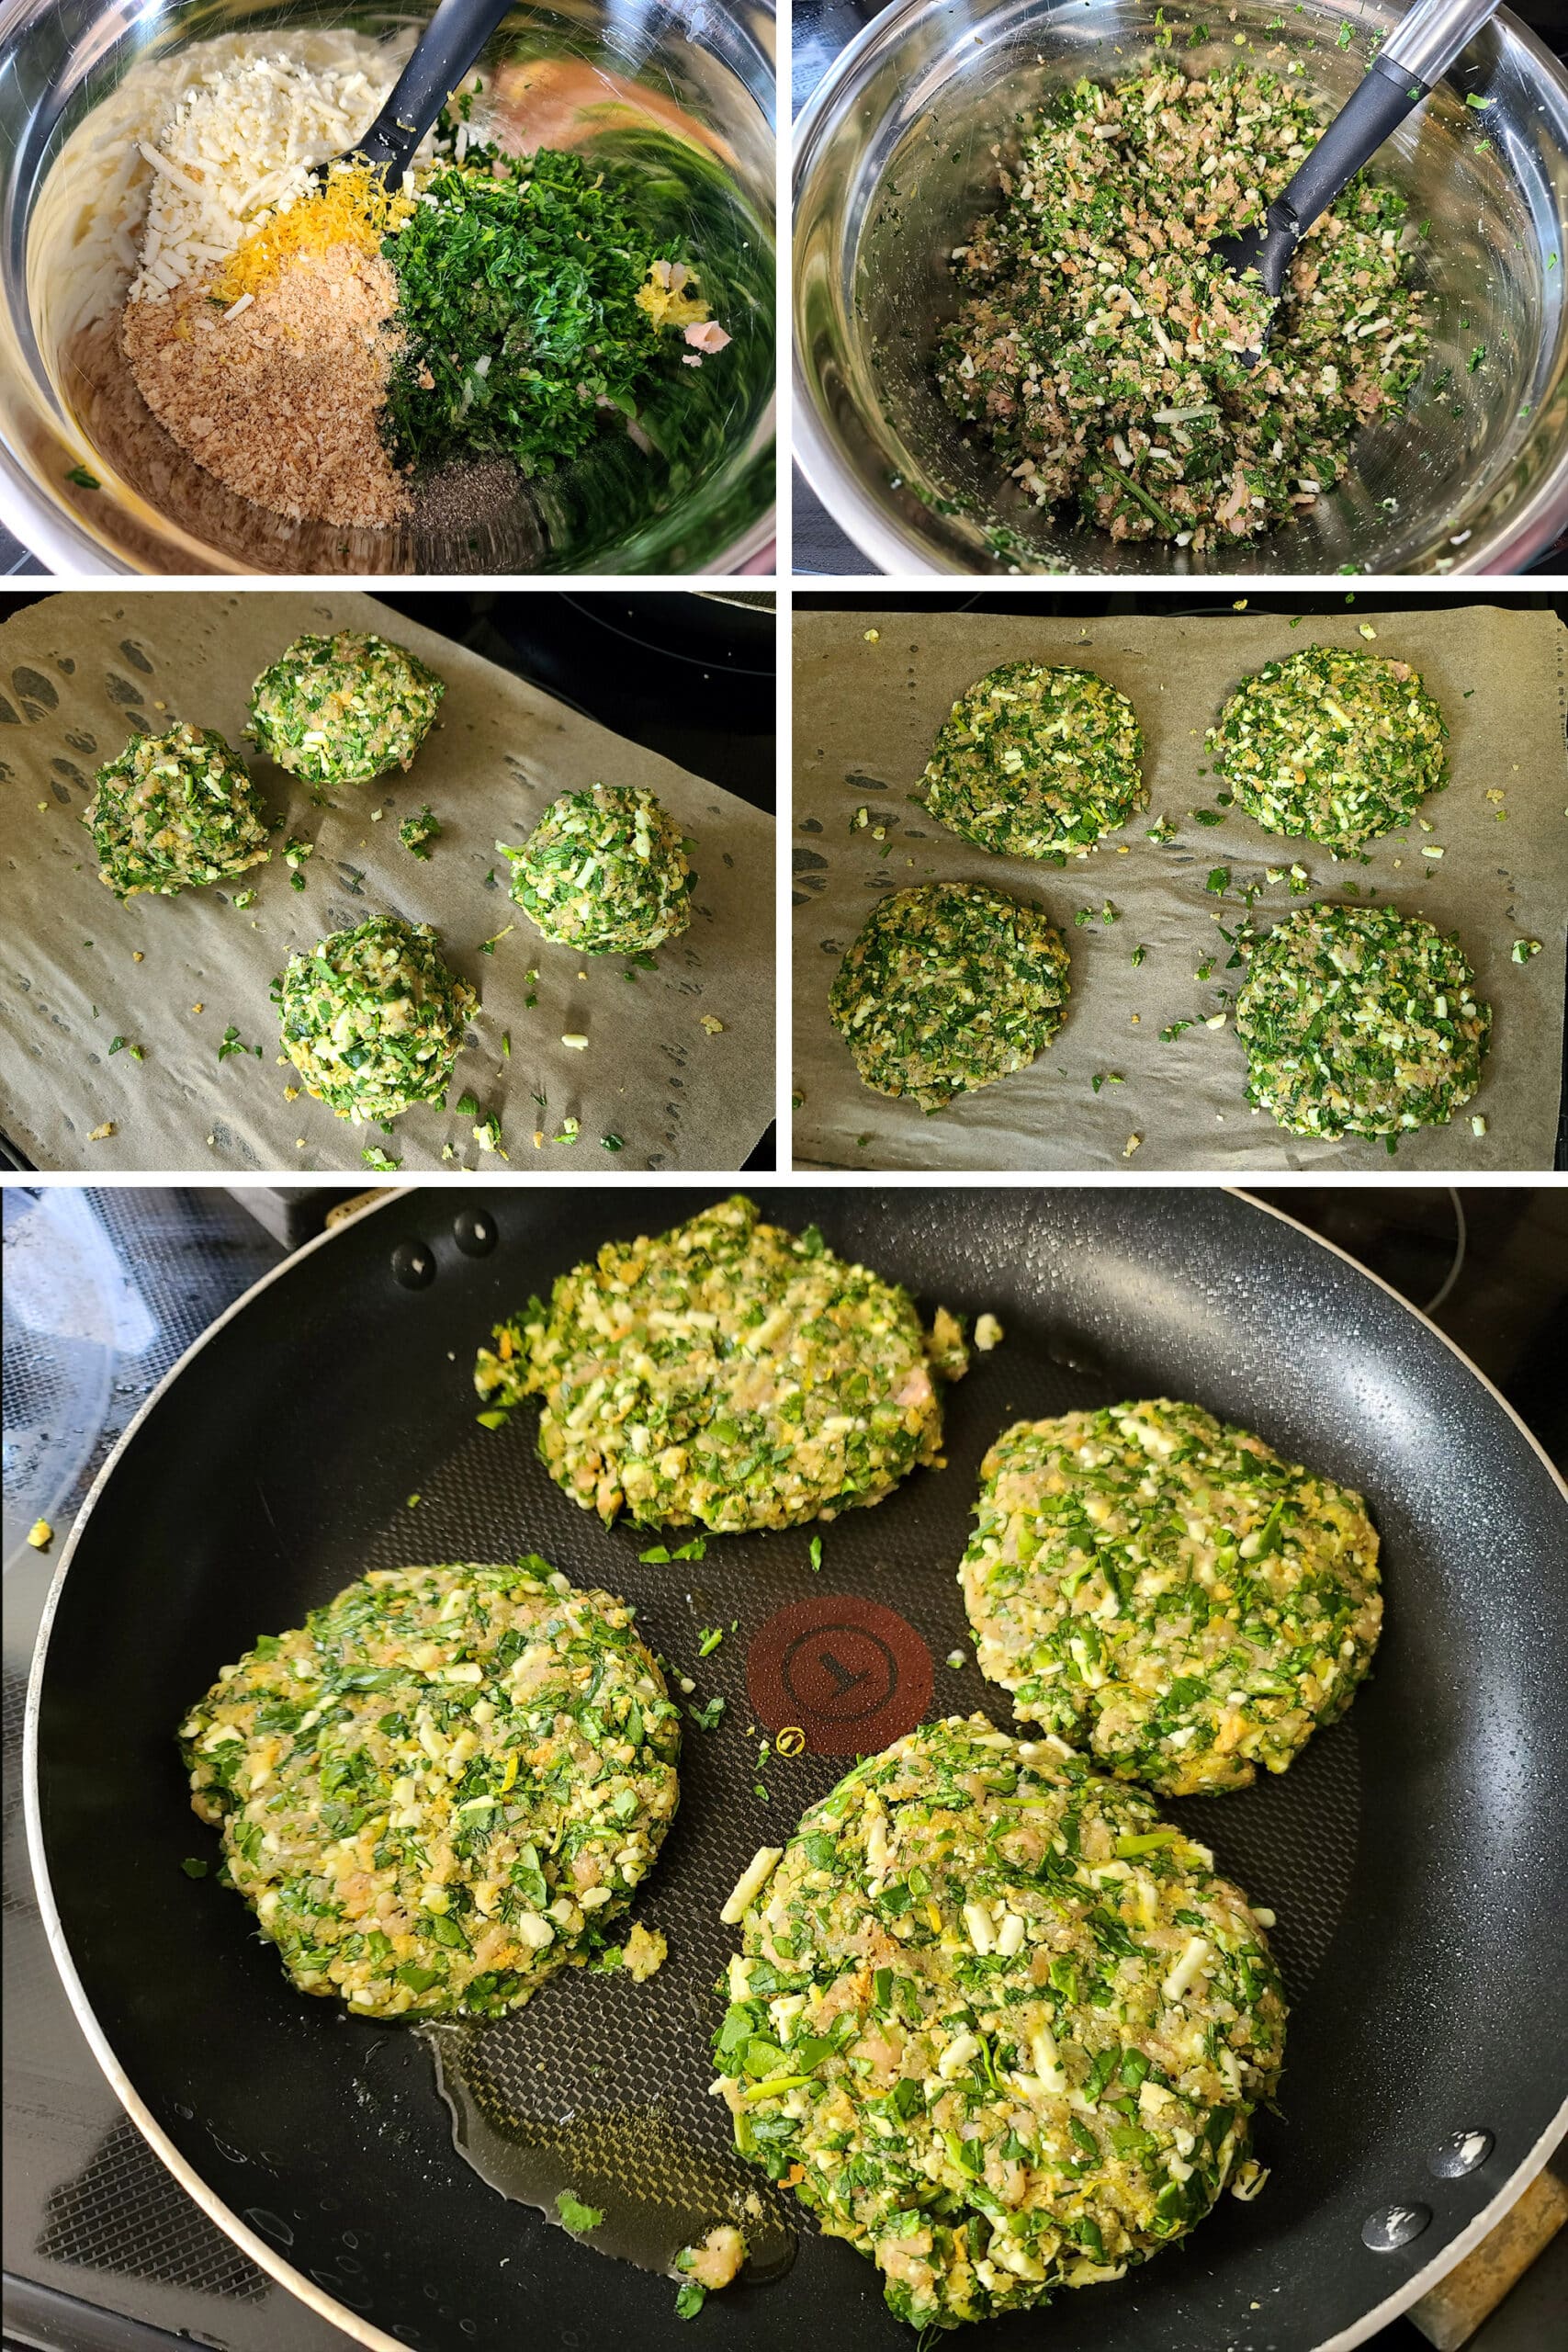 A 5 part image showing all of the salmon patty ingredients being mixed in a bowl, divided into 4 equal balls, formed into patties, and cooked in a fry pan.